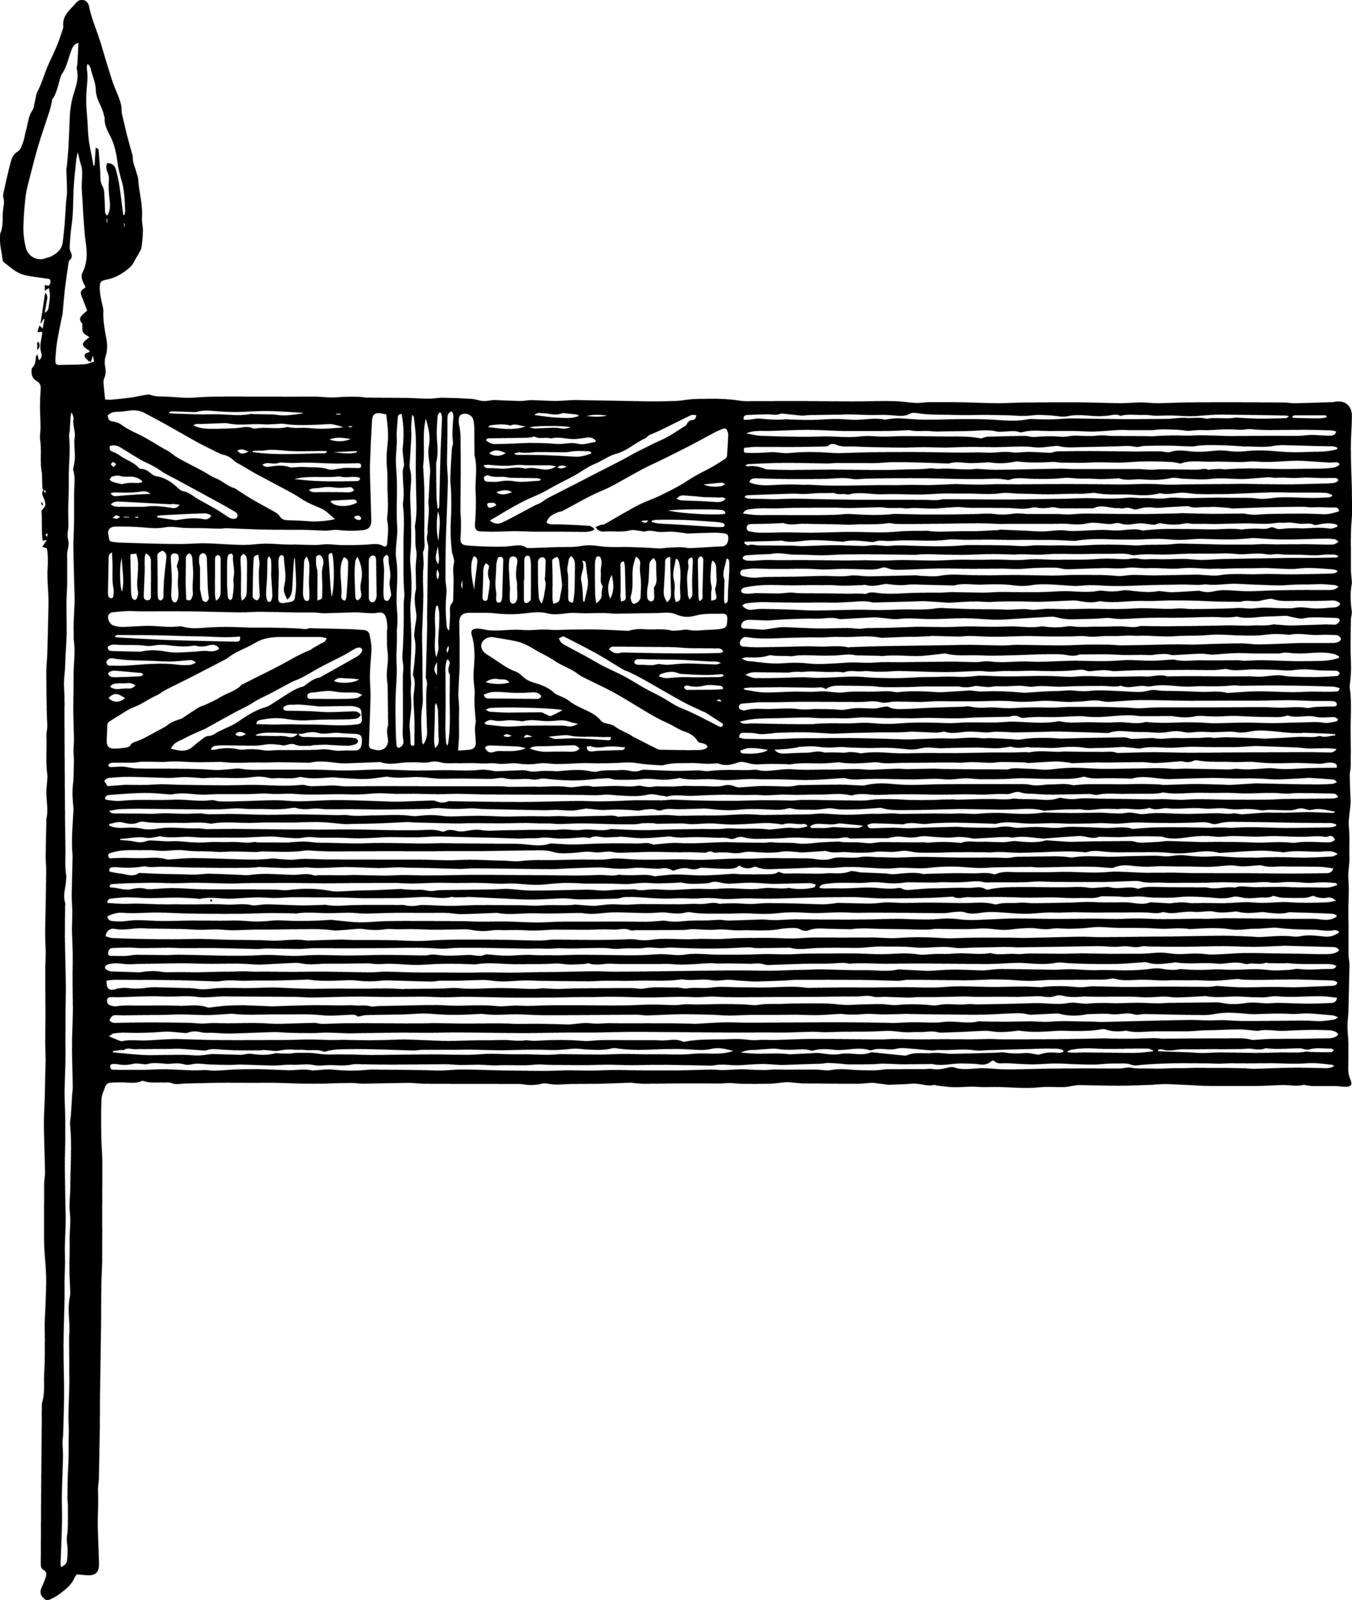 The Blue Ensign is a flag of Great Britain, this flag has union flag in its canton and remaining place has horizontal lines, vintage line drawing or engraving illustration 